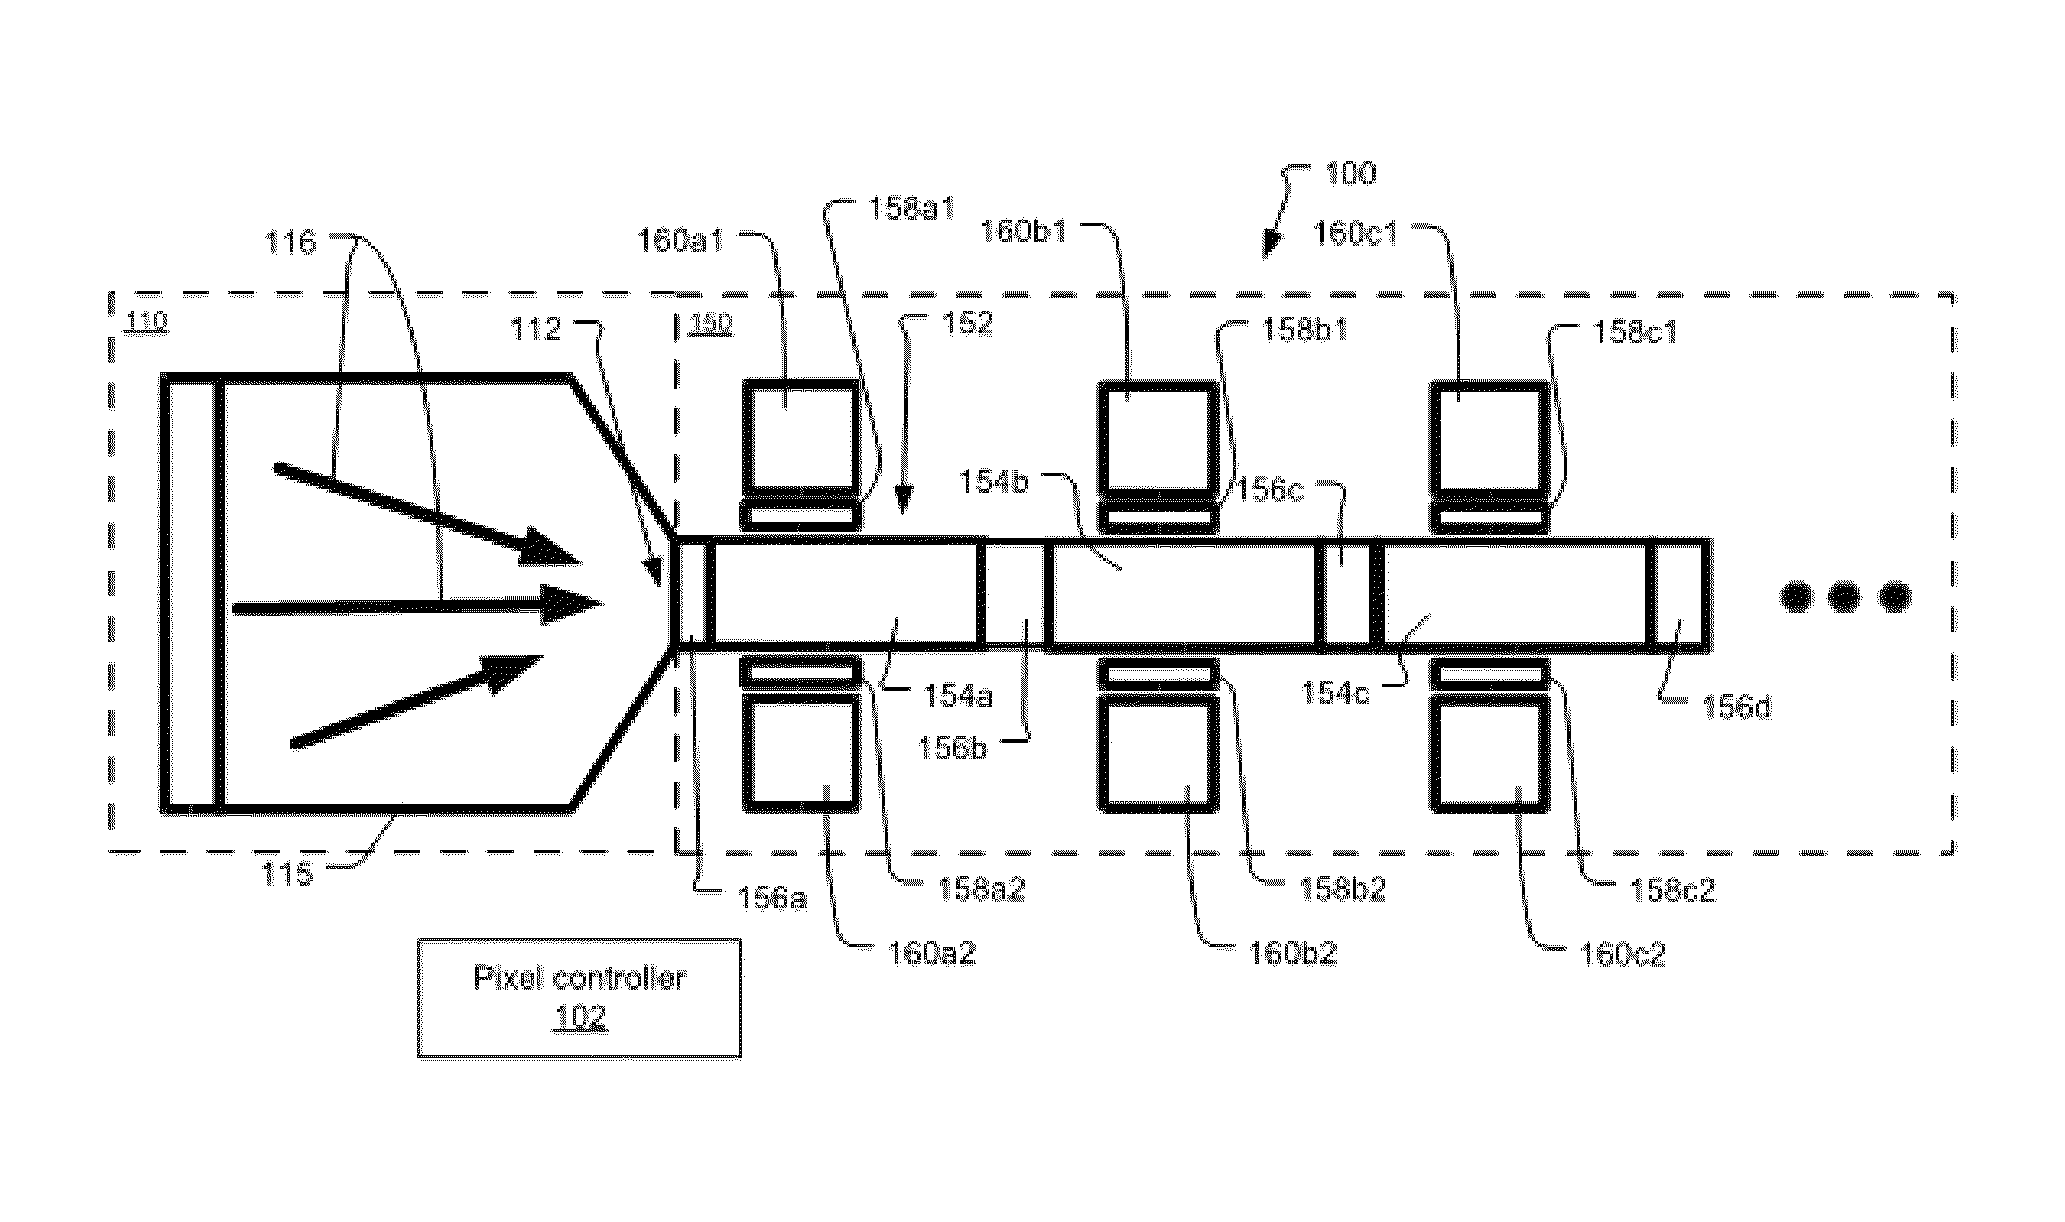 Demodulation pixel with daisy chain charge storage sites and method of operation therefor